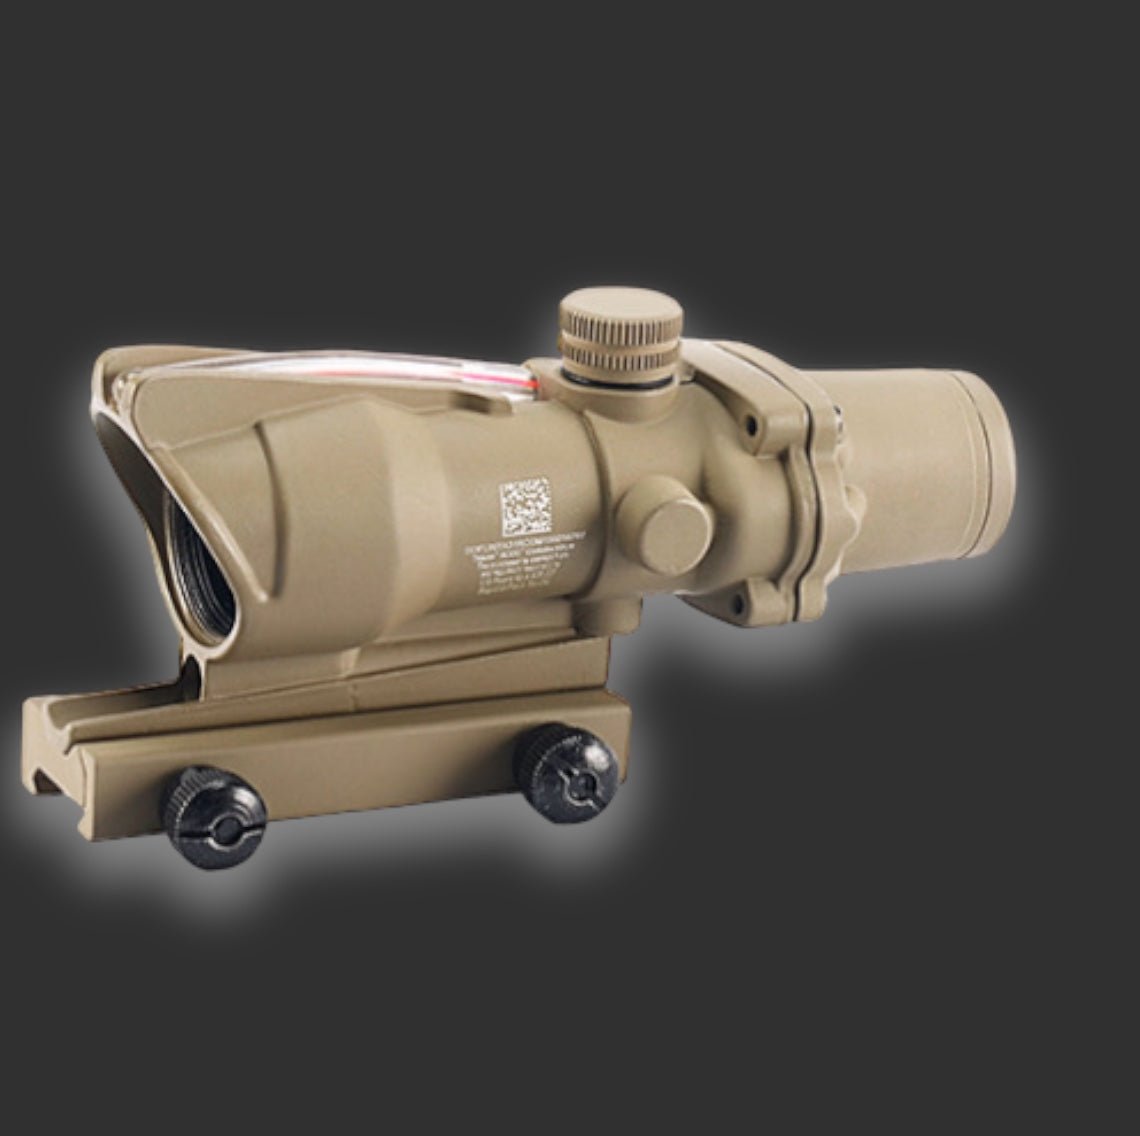 BlasterMasters ACOG Conch+DOC Metal Scope with a targeting reticle and adjustment knobs, mounted on a metal scope rail attachment base, set against a dark background.